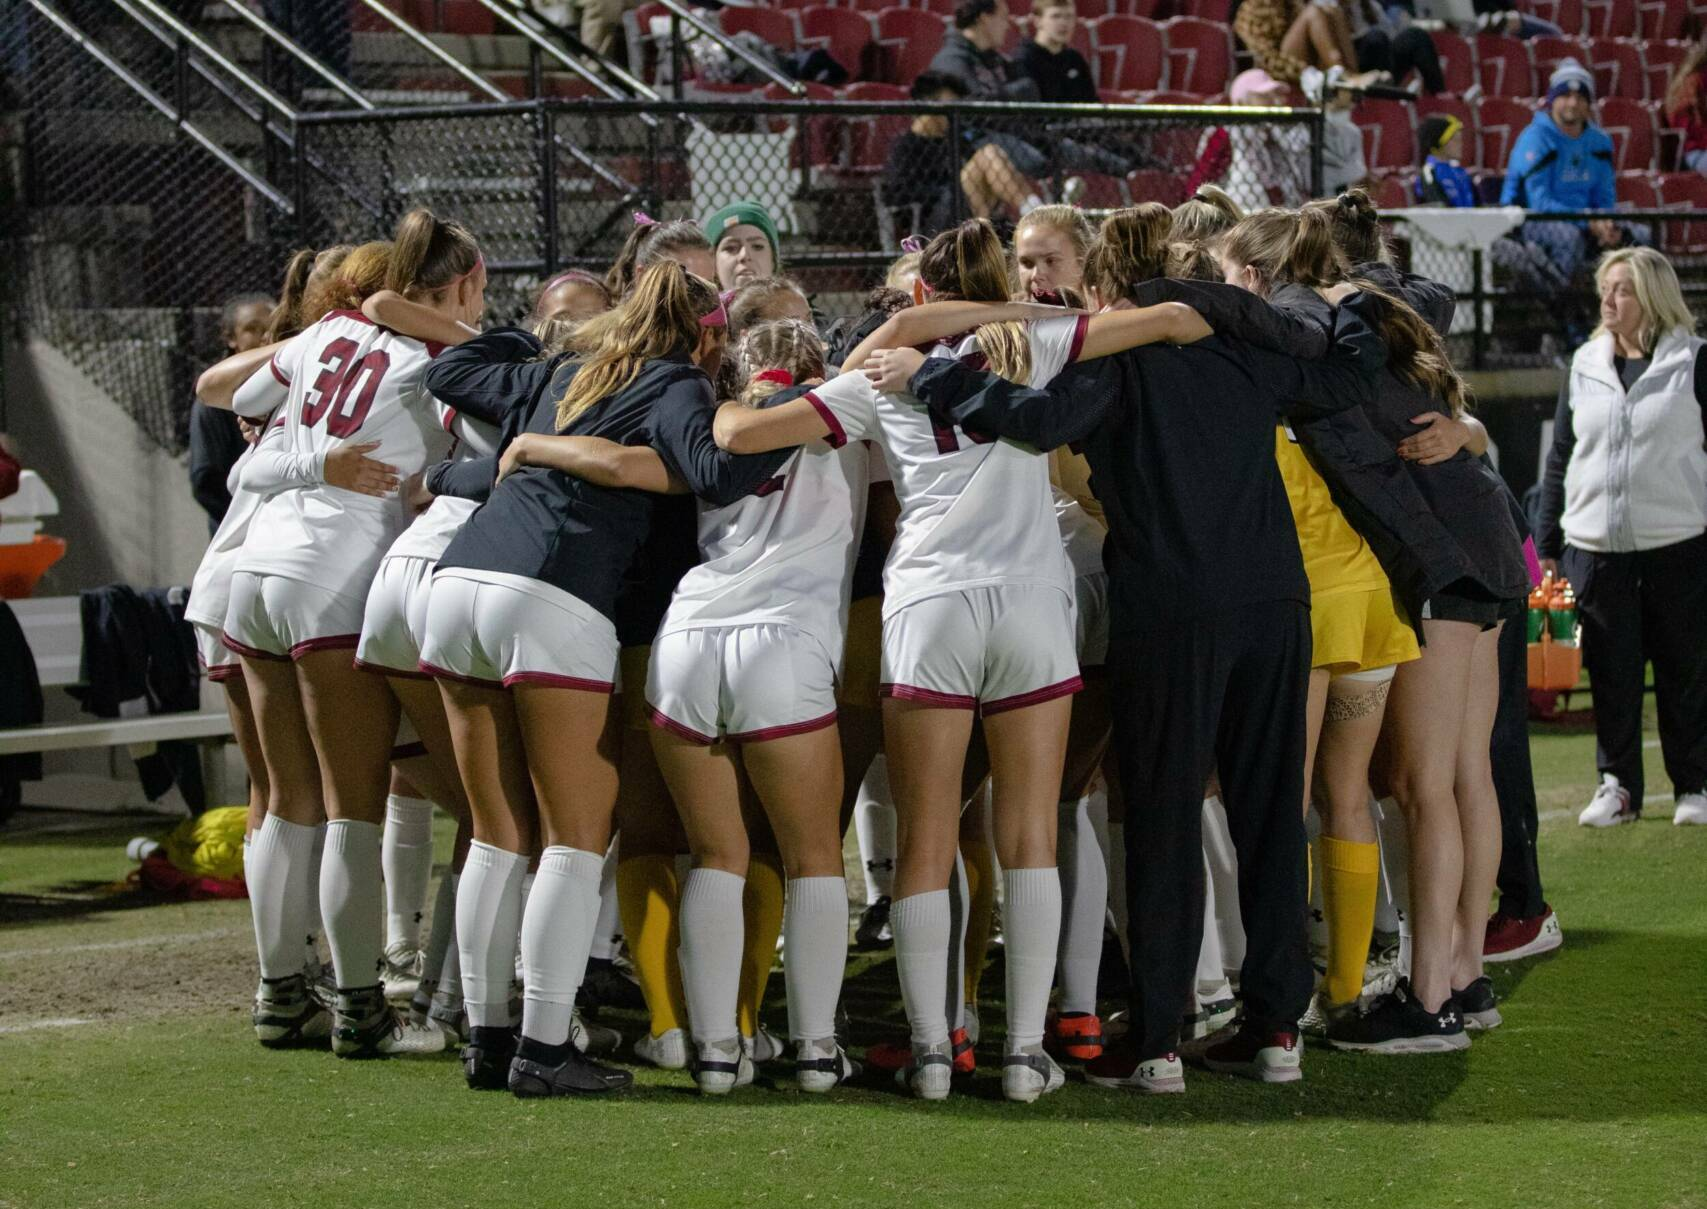 Women's Soccer Comes From Behind to Tie with Texas A&M, 1-1